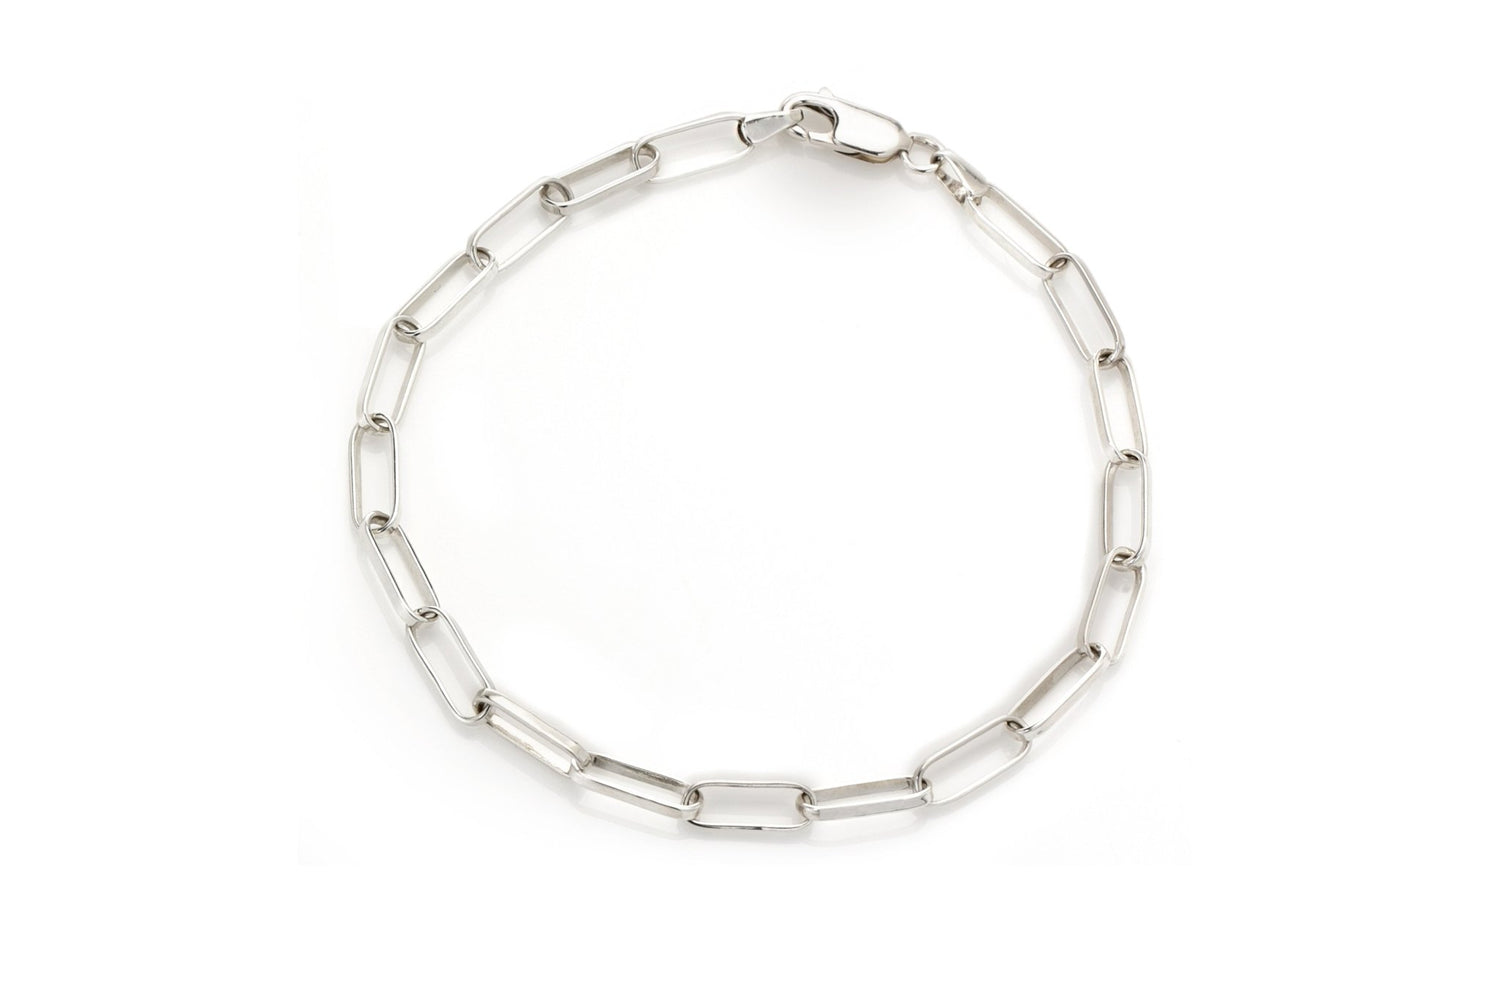 Stylish and Trendy 925 Sterling Silver Solid Plain Paper Clip Link Chain Bracelet - 19cm Length, Parrot Clasp - RubyJade